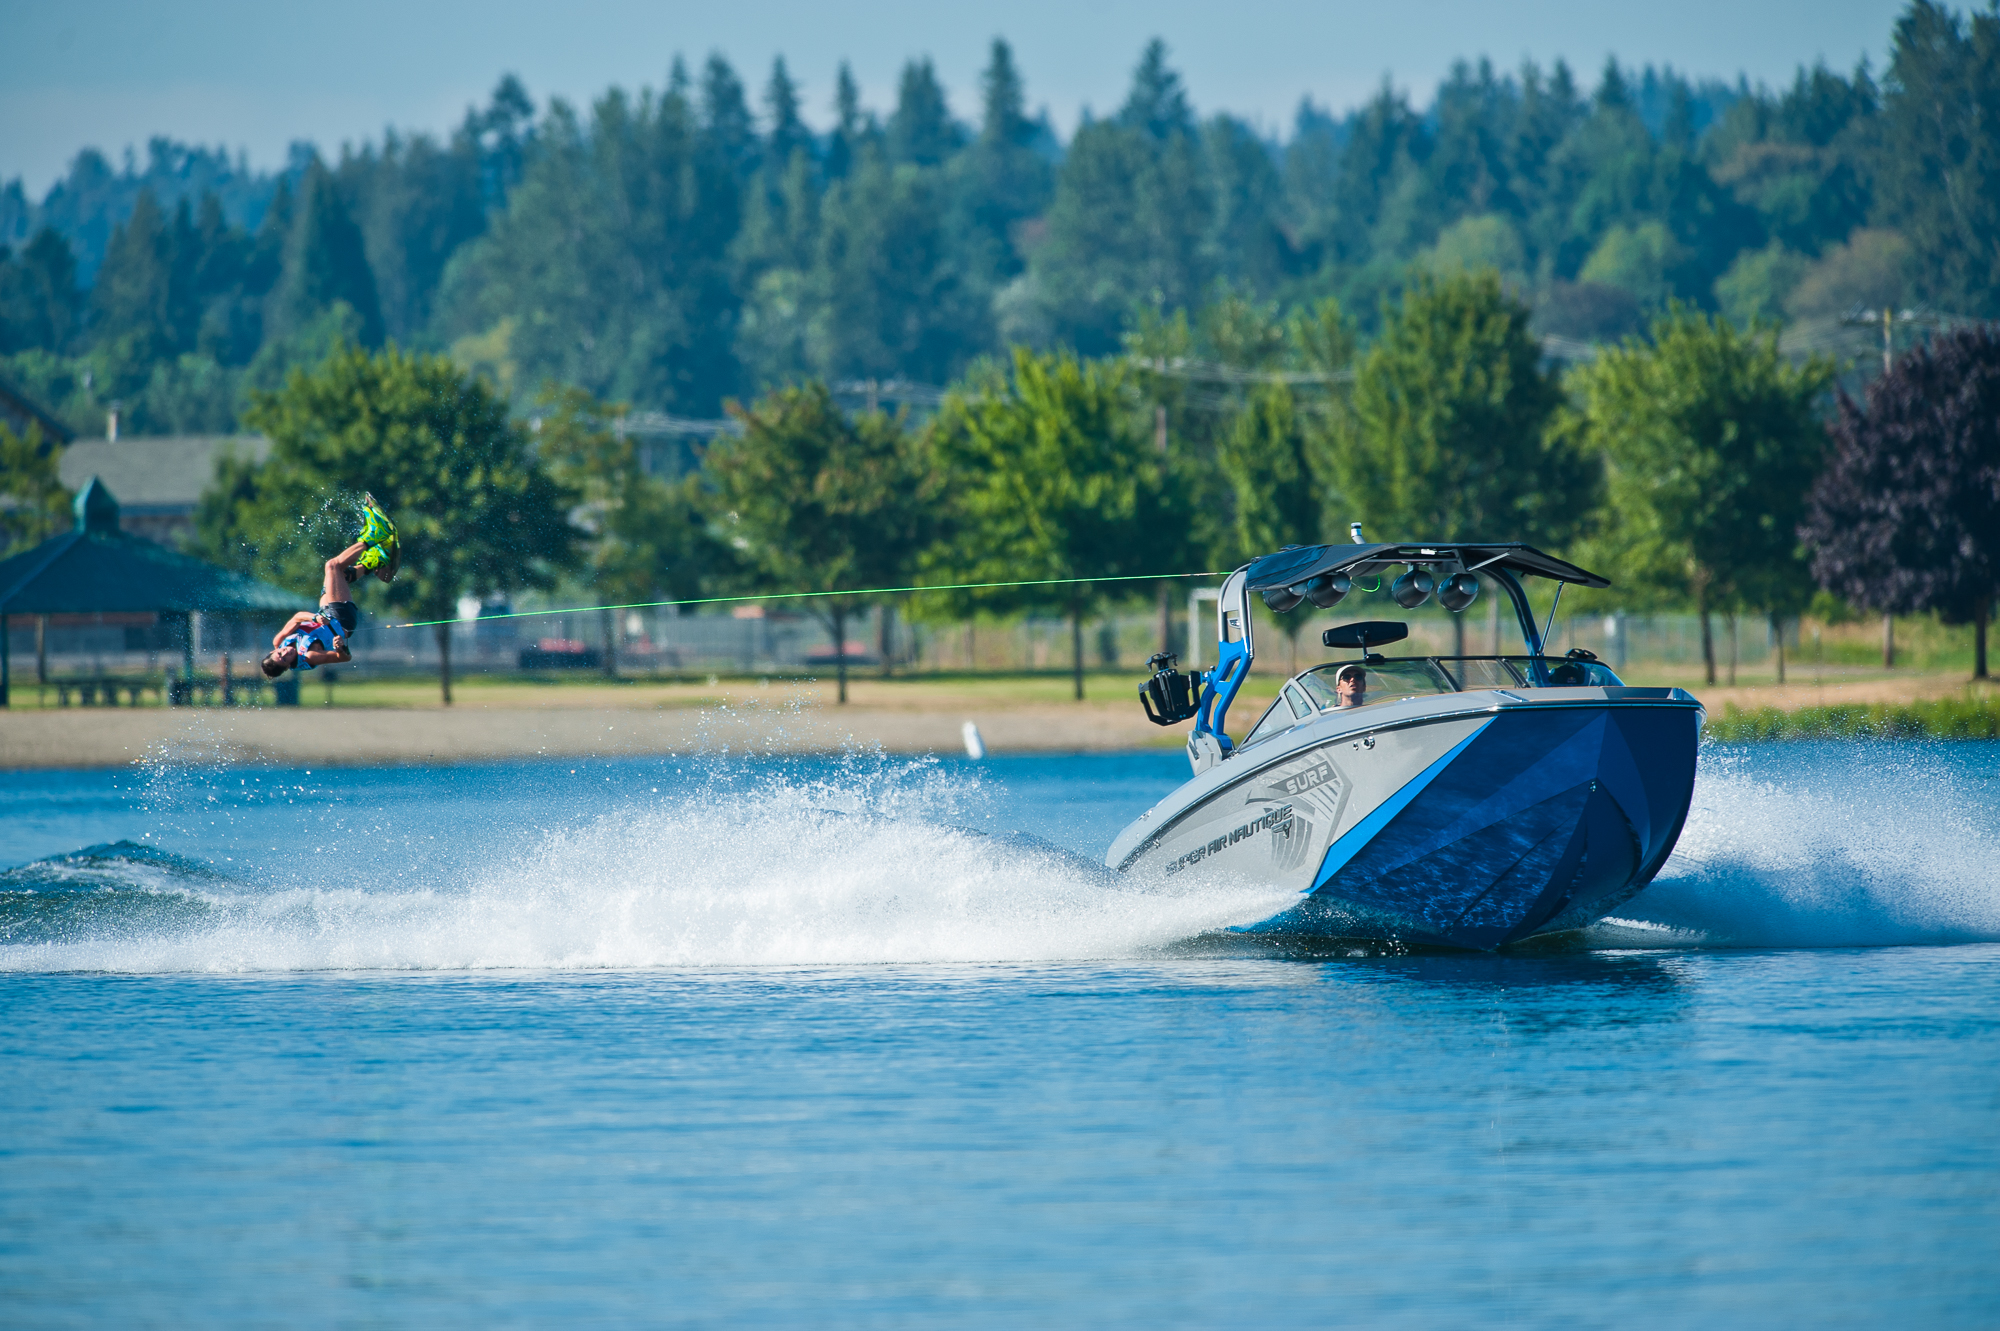 TOP AMATEURS EXCEL BEHIND THE SUPER AIR NAUTIQUE G23 ON DAY ONE OF THE 2018 NAUTIQUE WWA WAKEBOARD NATIONAL CHAMPIONSHIPS PRESENTED BY ROCKSTAR ENERGY 